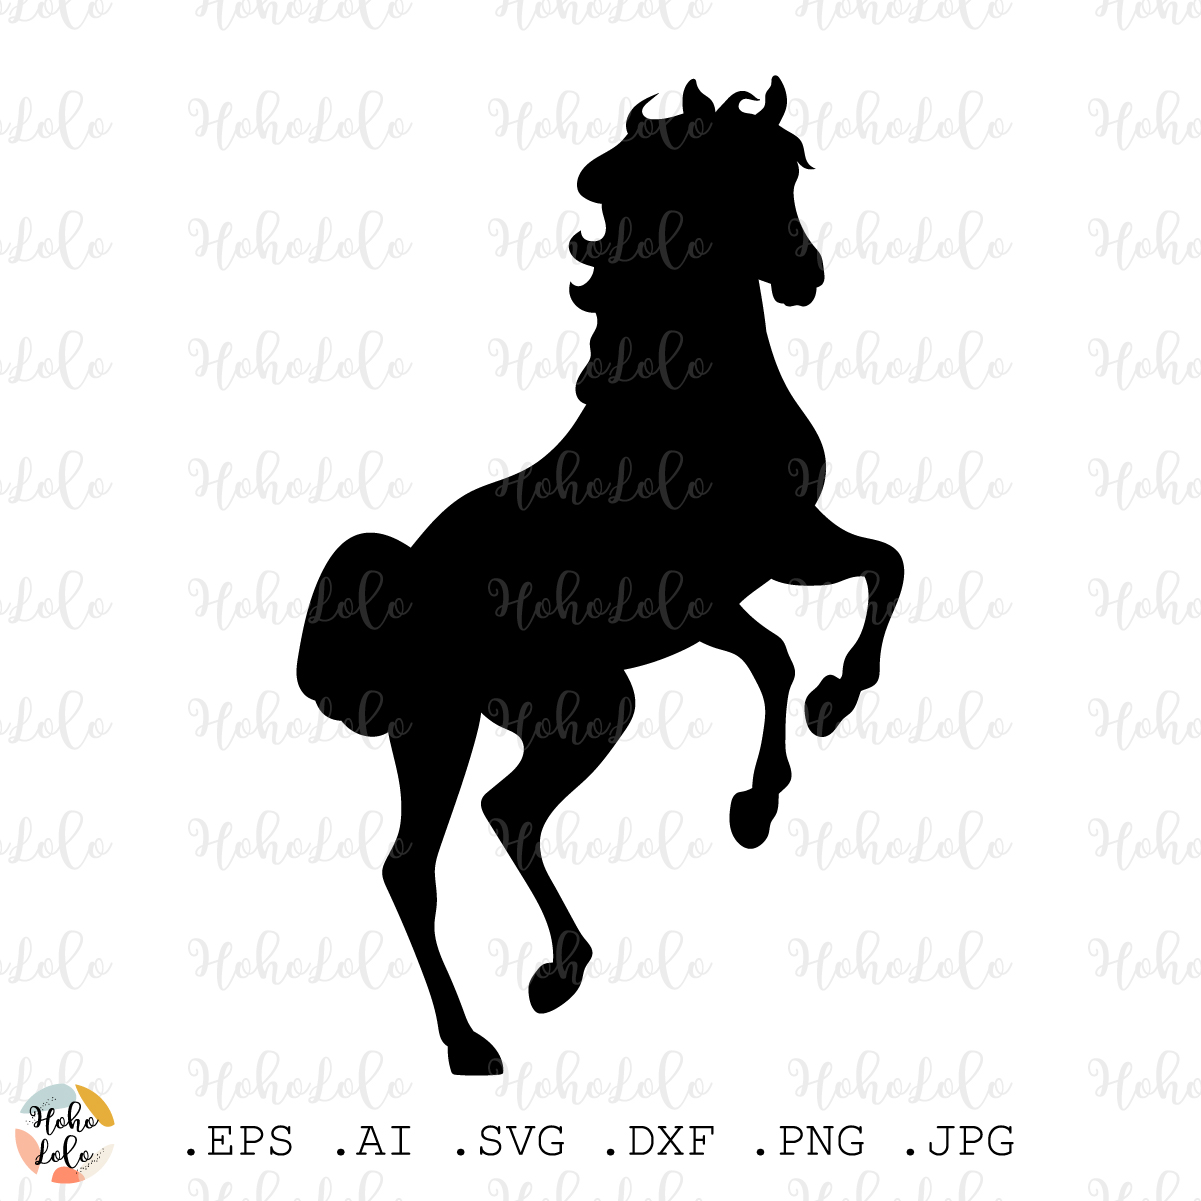 Horse Shoes SVG, PNG, DXF. Instant download files for Cricut Design Space,  Silhouette, Cutting, Printing, or more